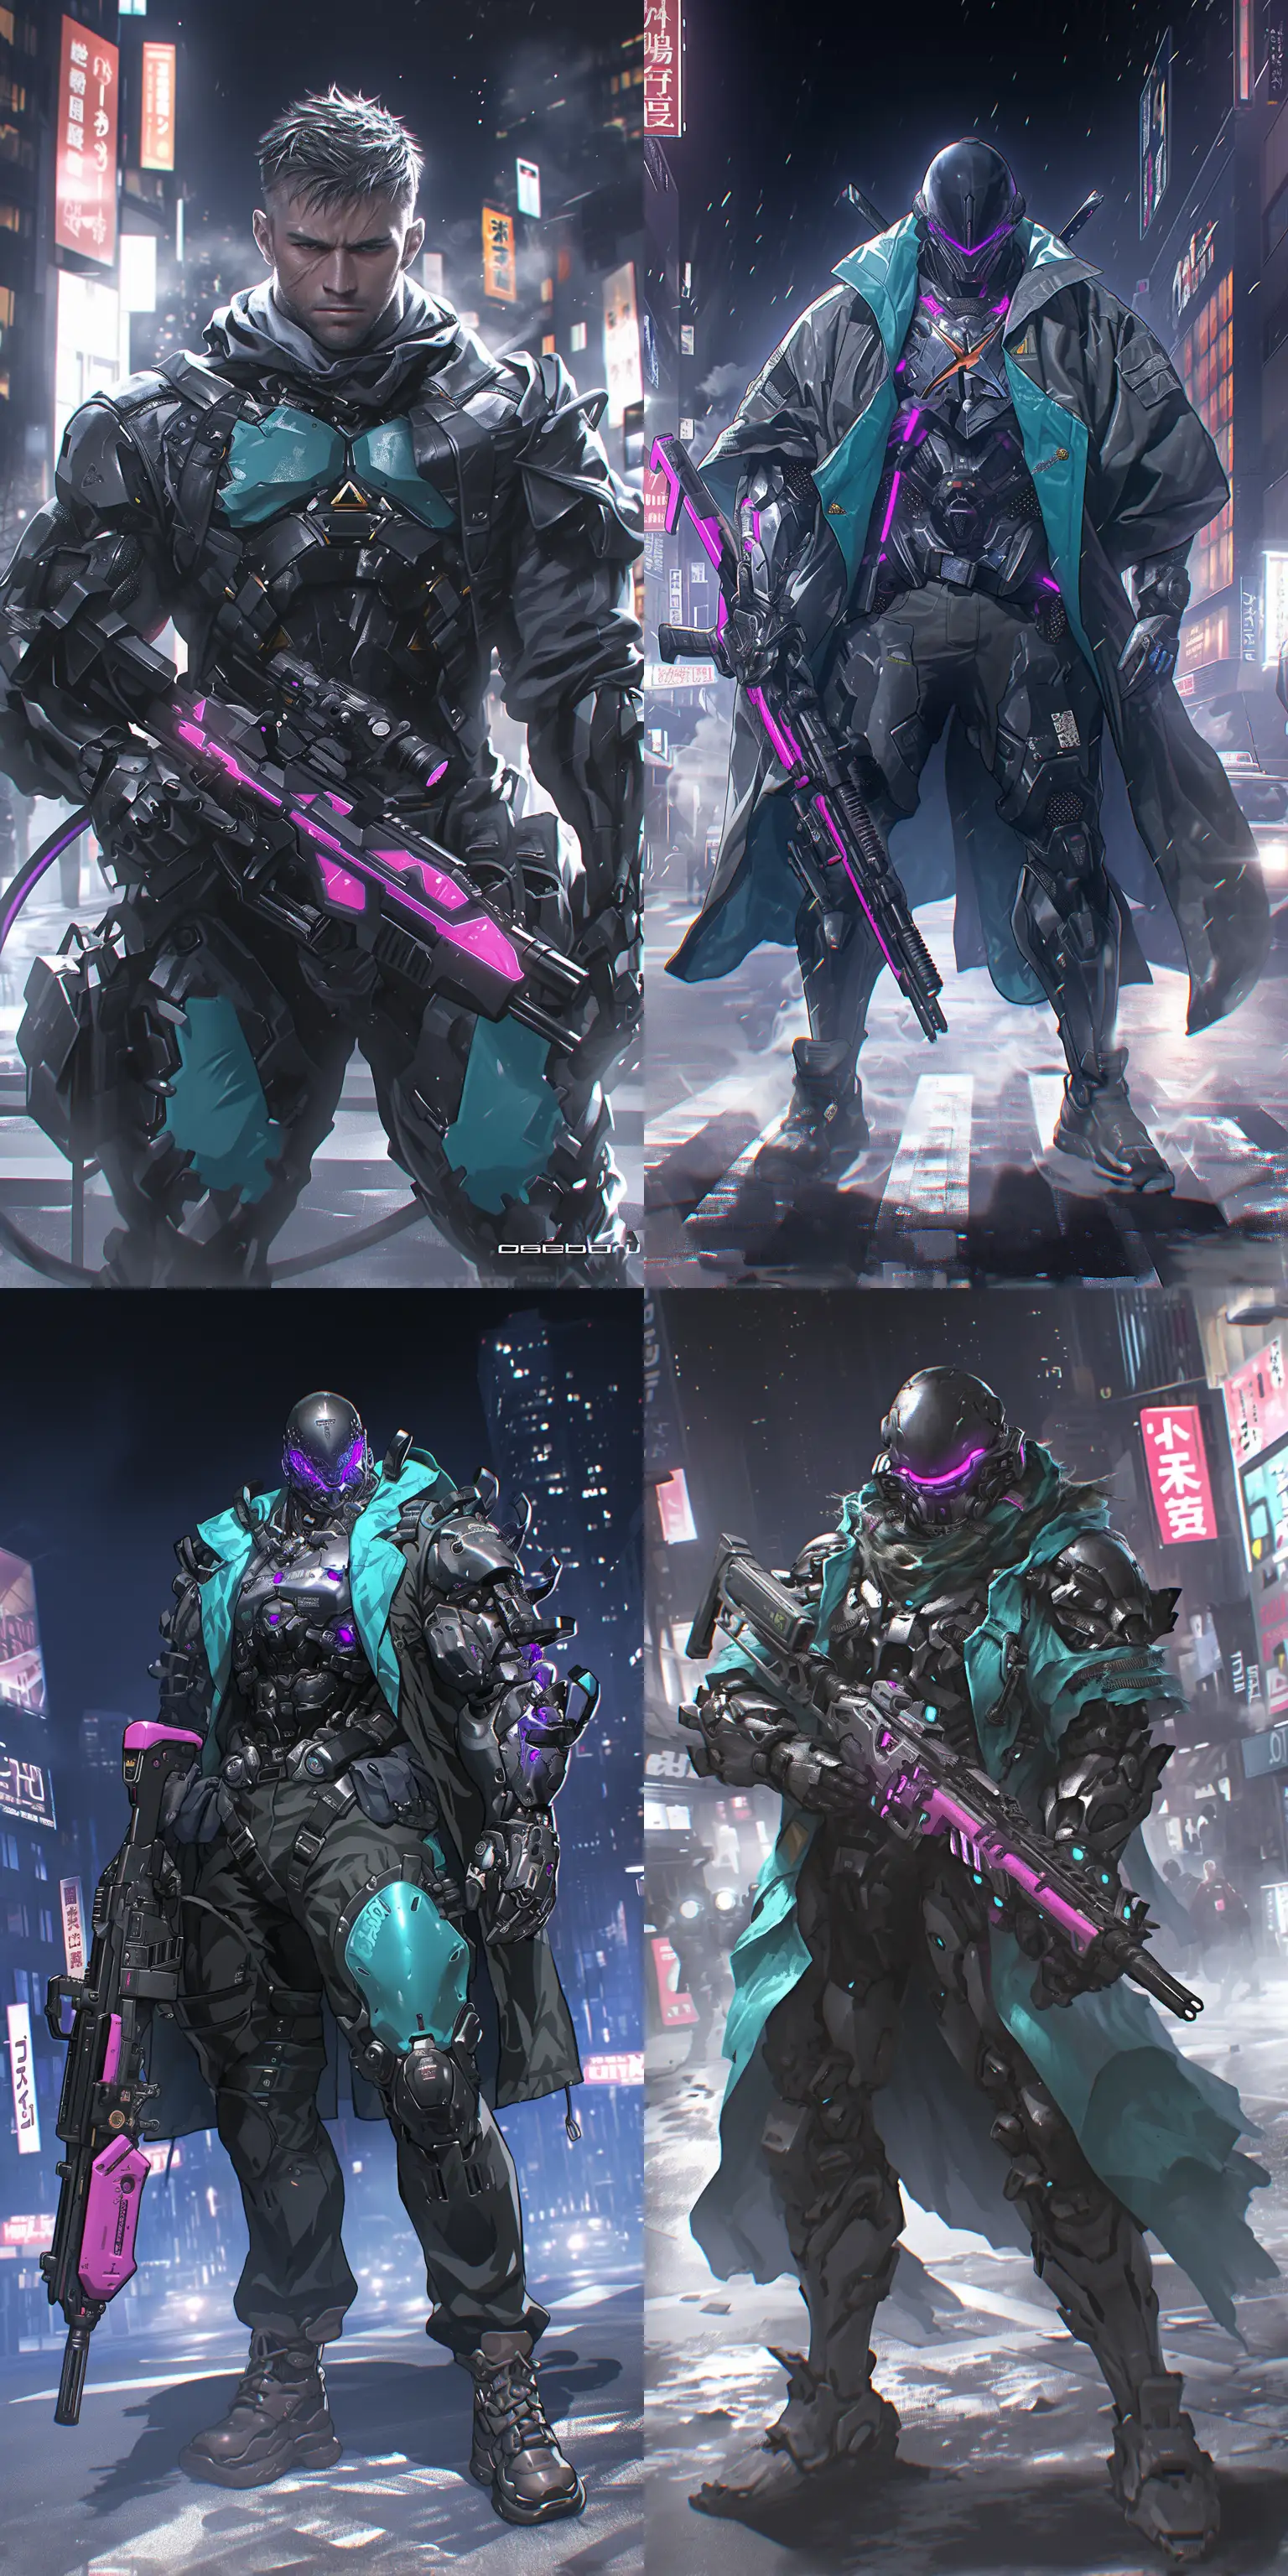 Futuristic-Armored-Man-in-Carbon-and-Turquoise-Armor-with-Submachine-Gun-in-Neo-Tokyo-City-at-Night